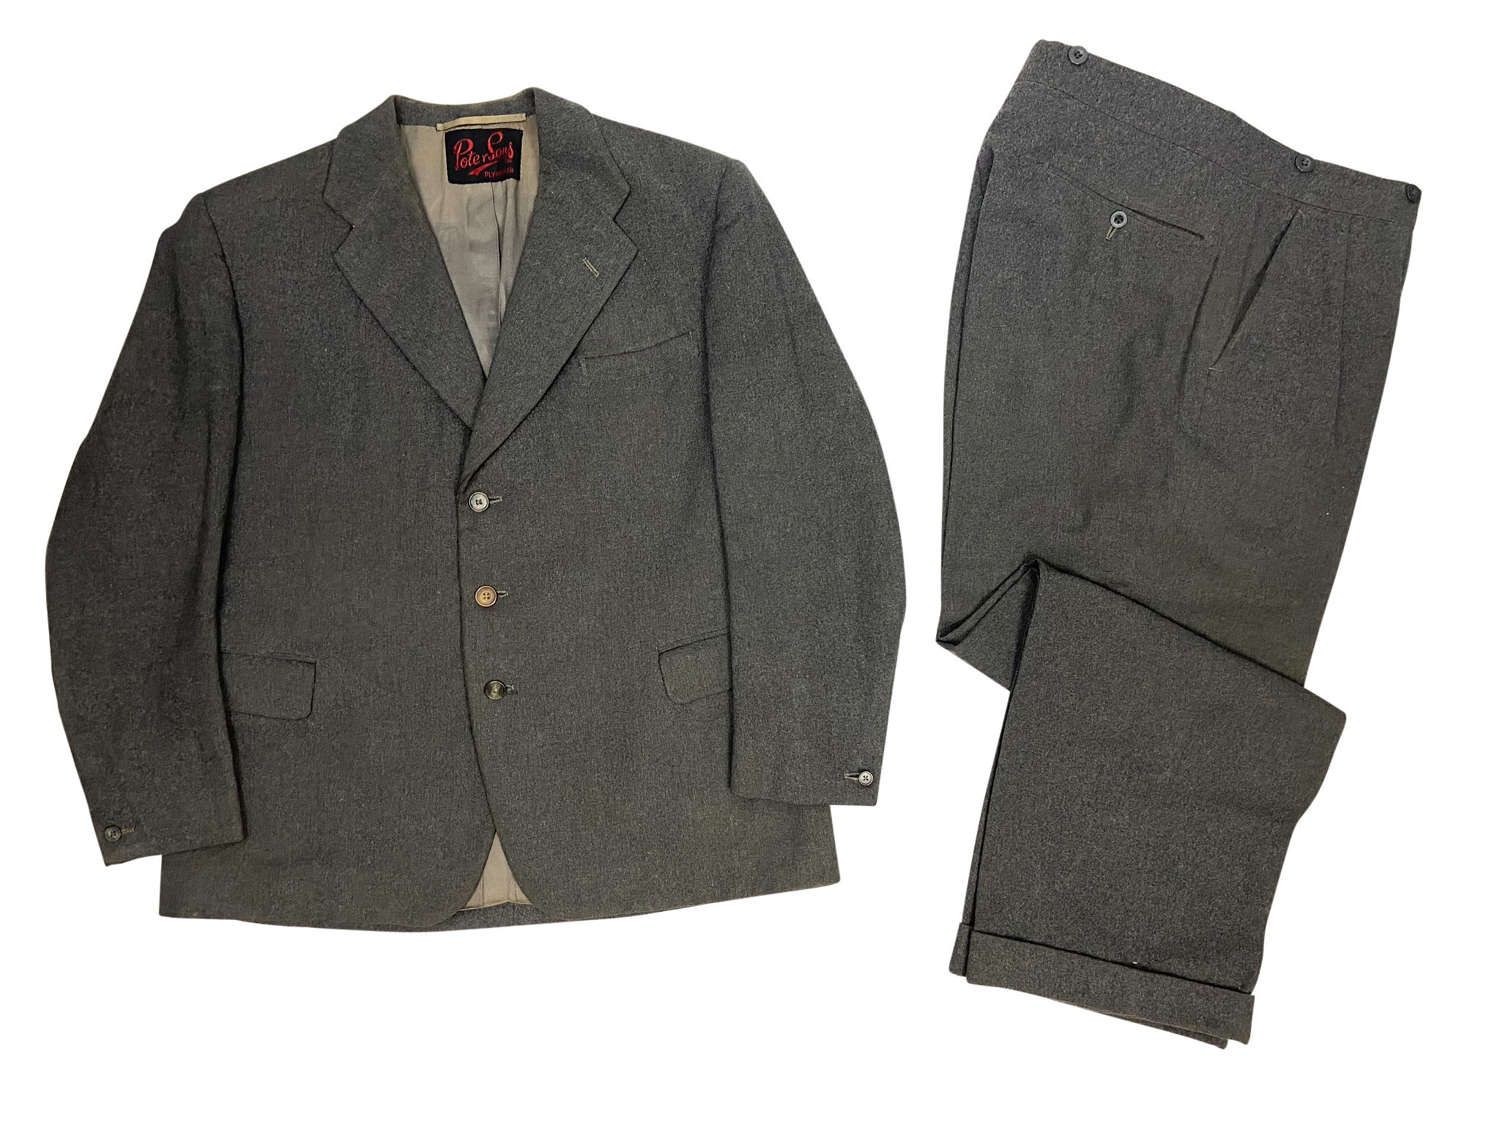 Original 1960 Dated Men's Grey Flannel Suit by 'Pote & Sons'